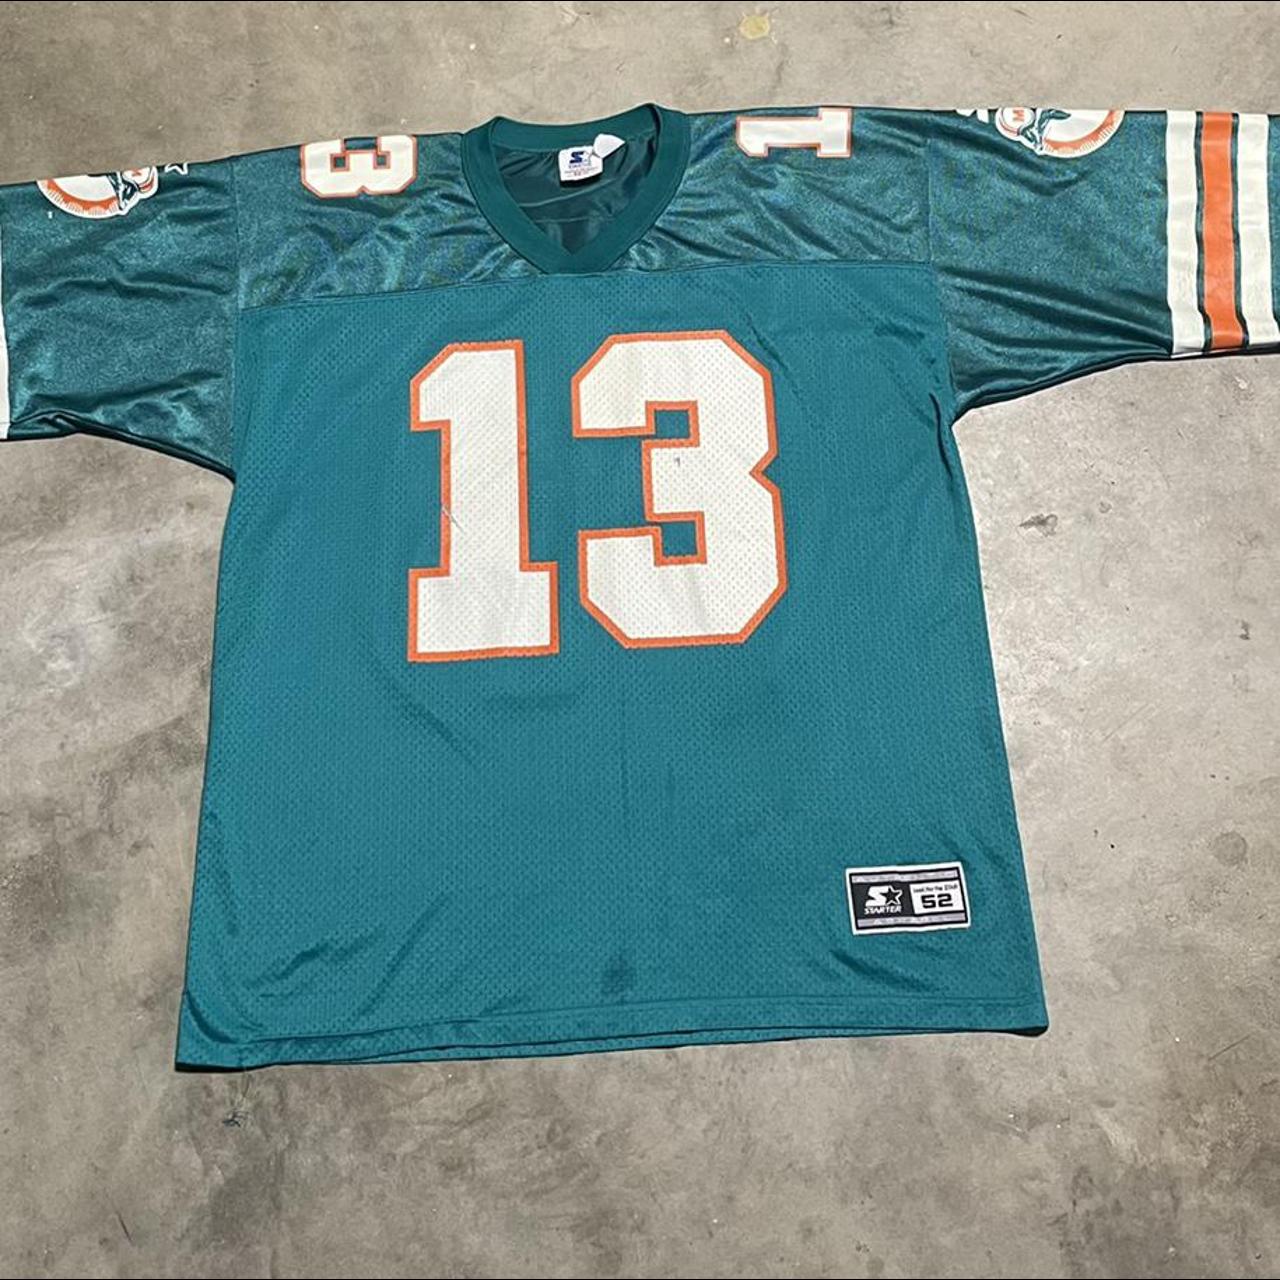 MIAMI DOLPHINS OF THE CENTURY # 13 #39 # 66 # 12 FOOTBALL JERSEY